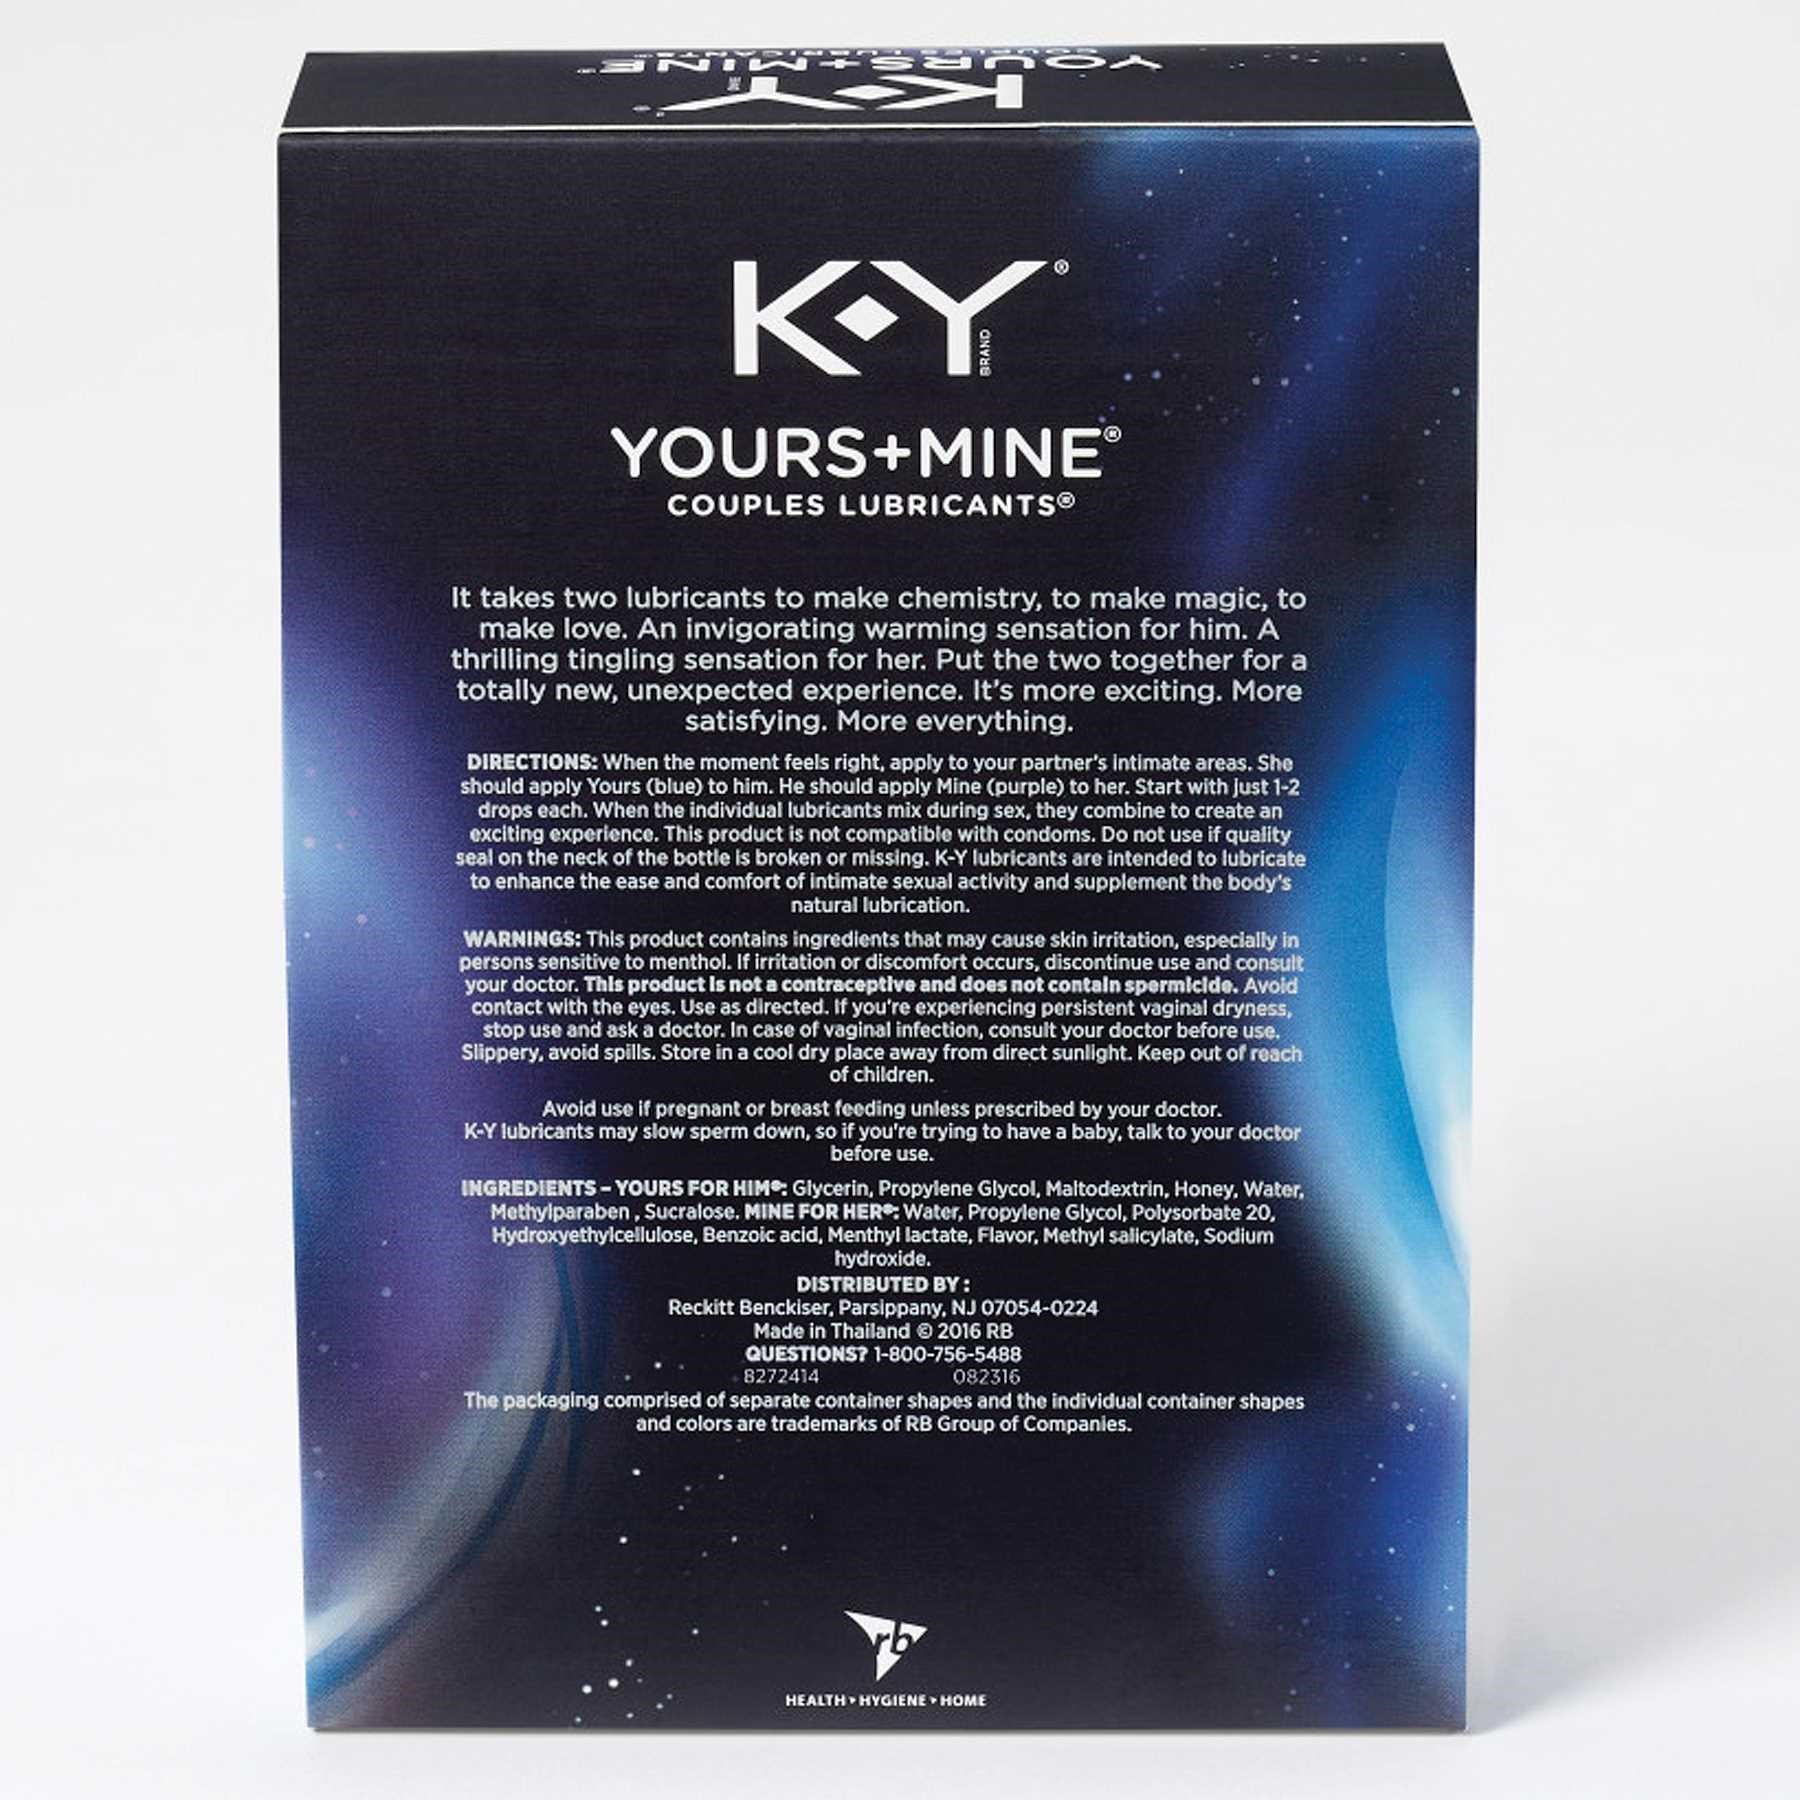 K-Y Yours & Mine Couples Lubricant back of box